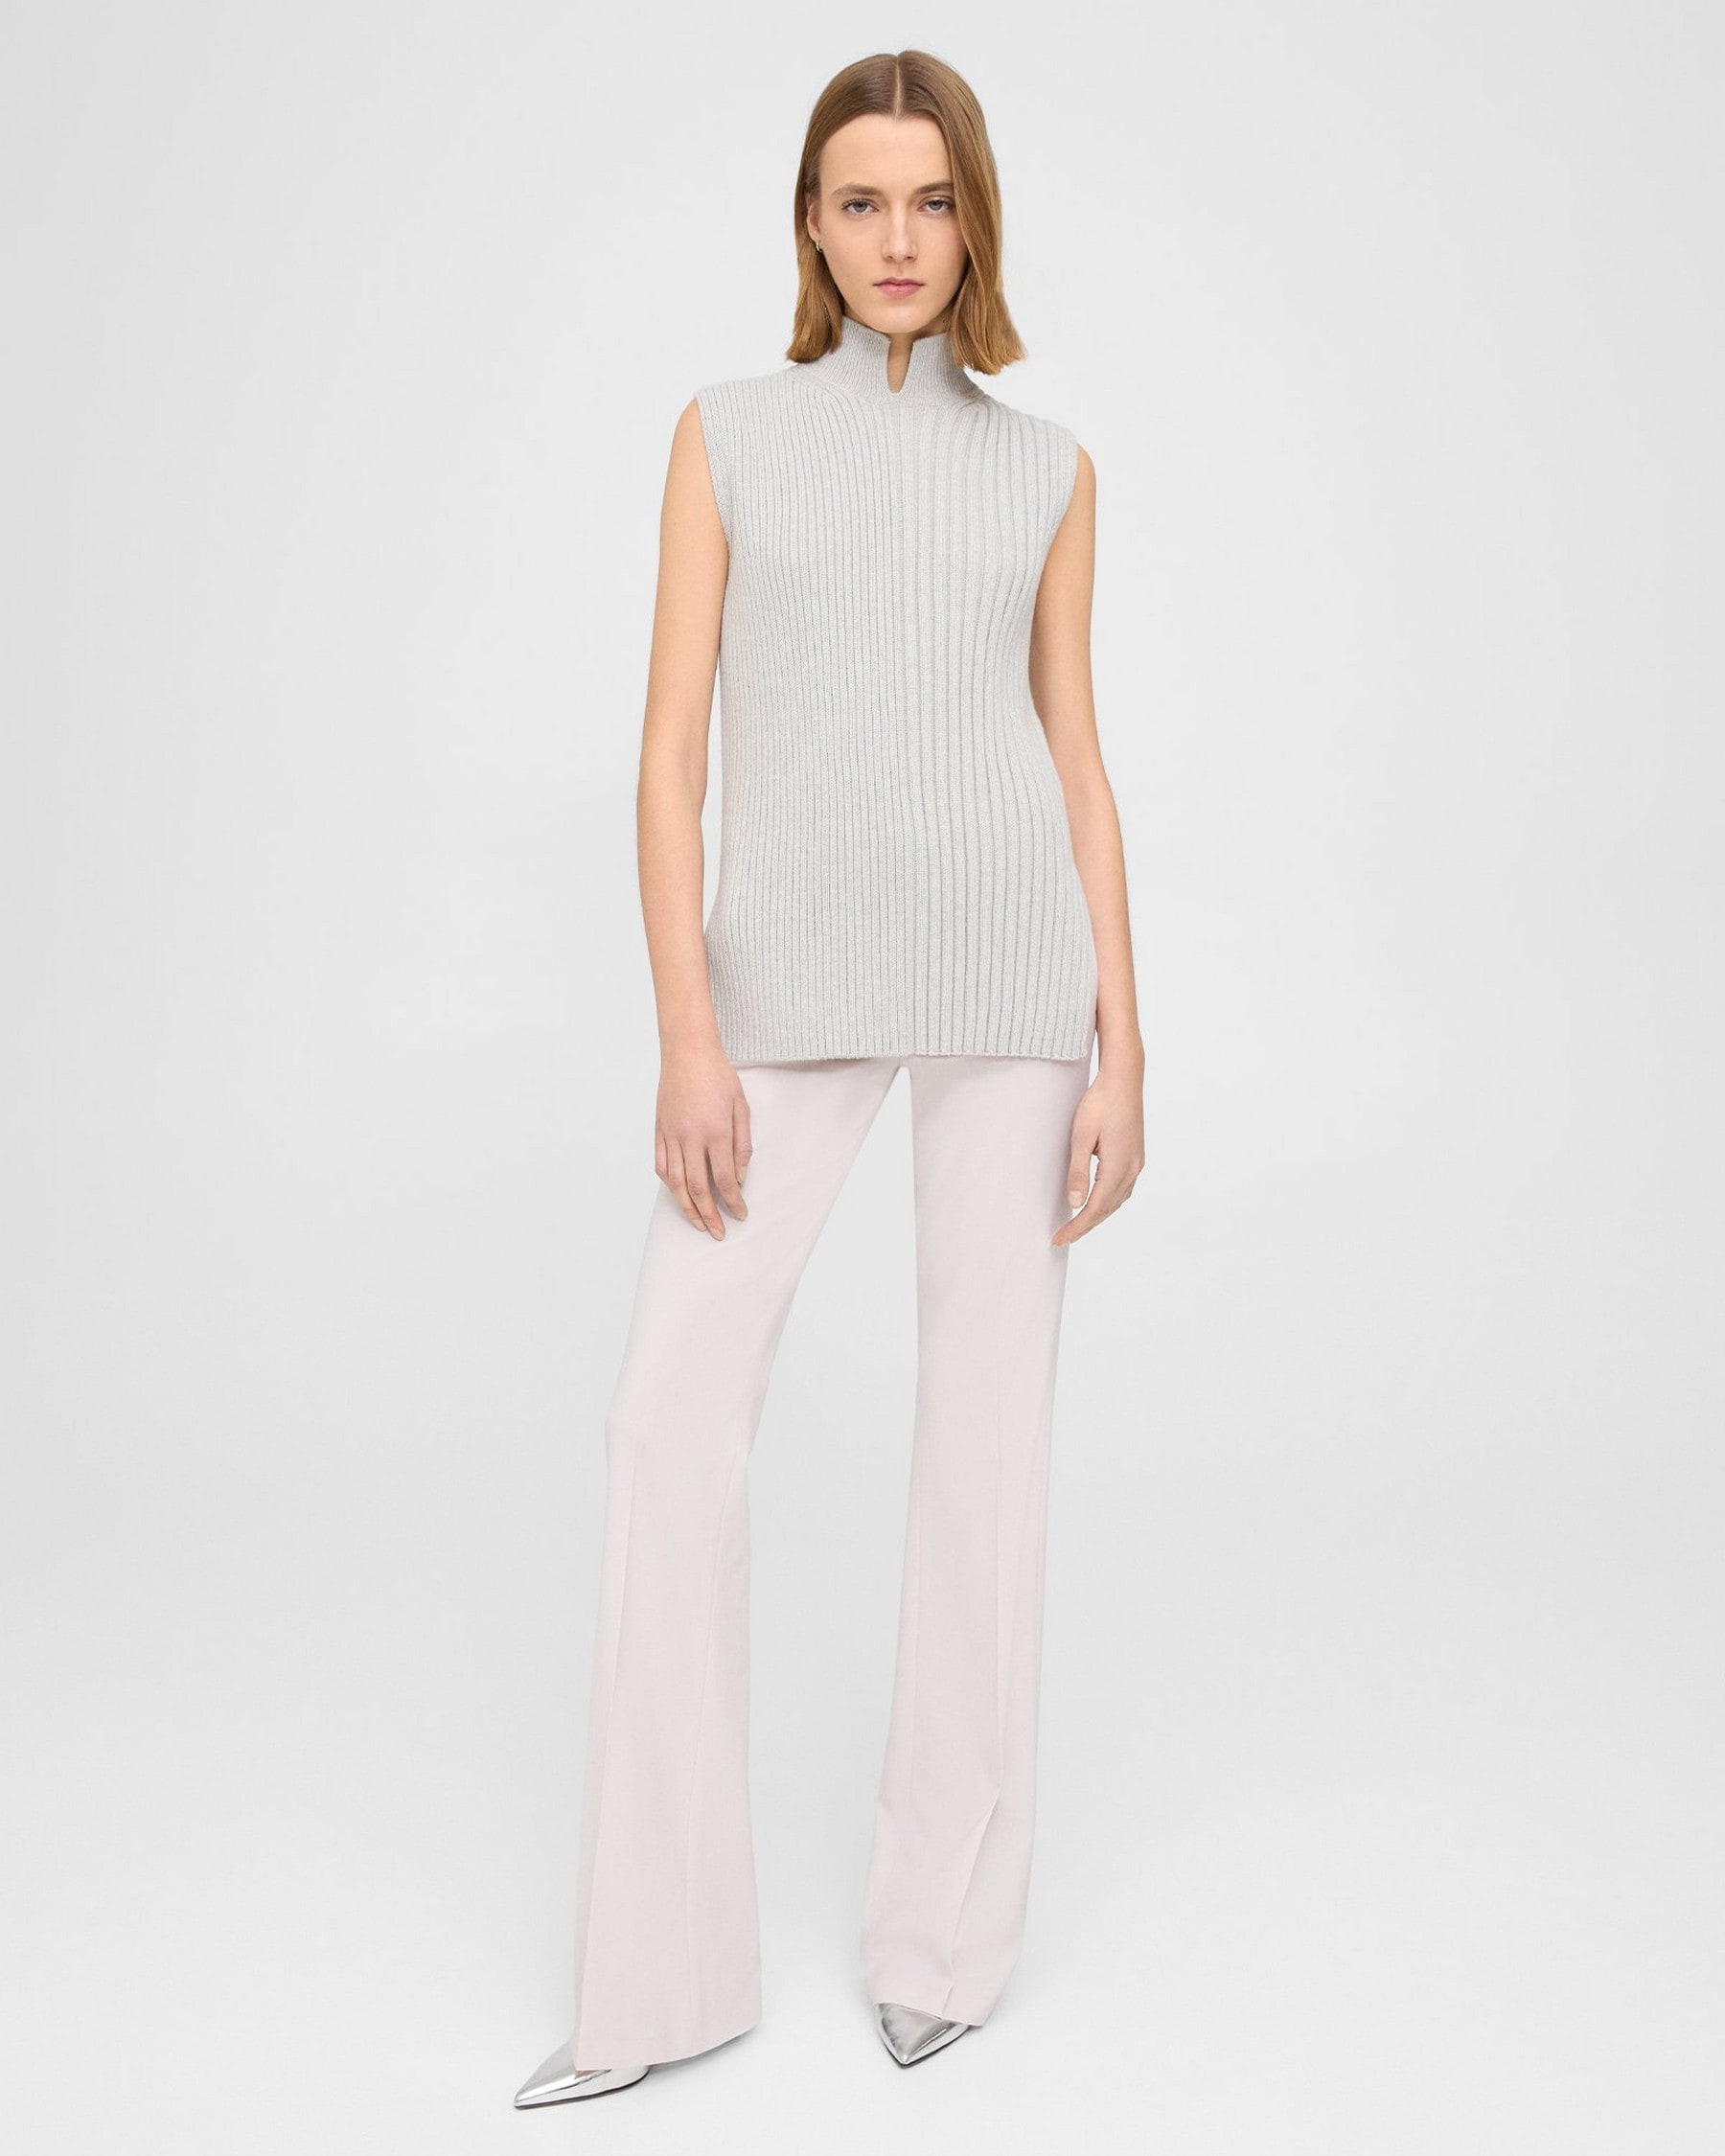 Turtleneck Shell Top in Cotton-Cashmere